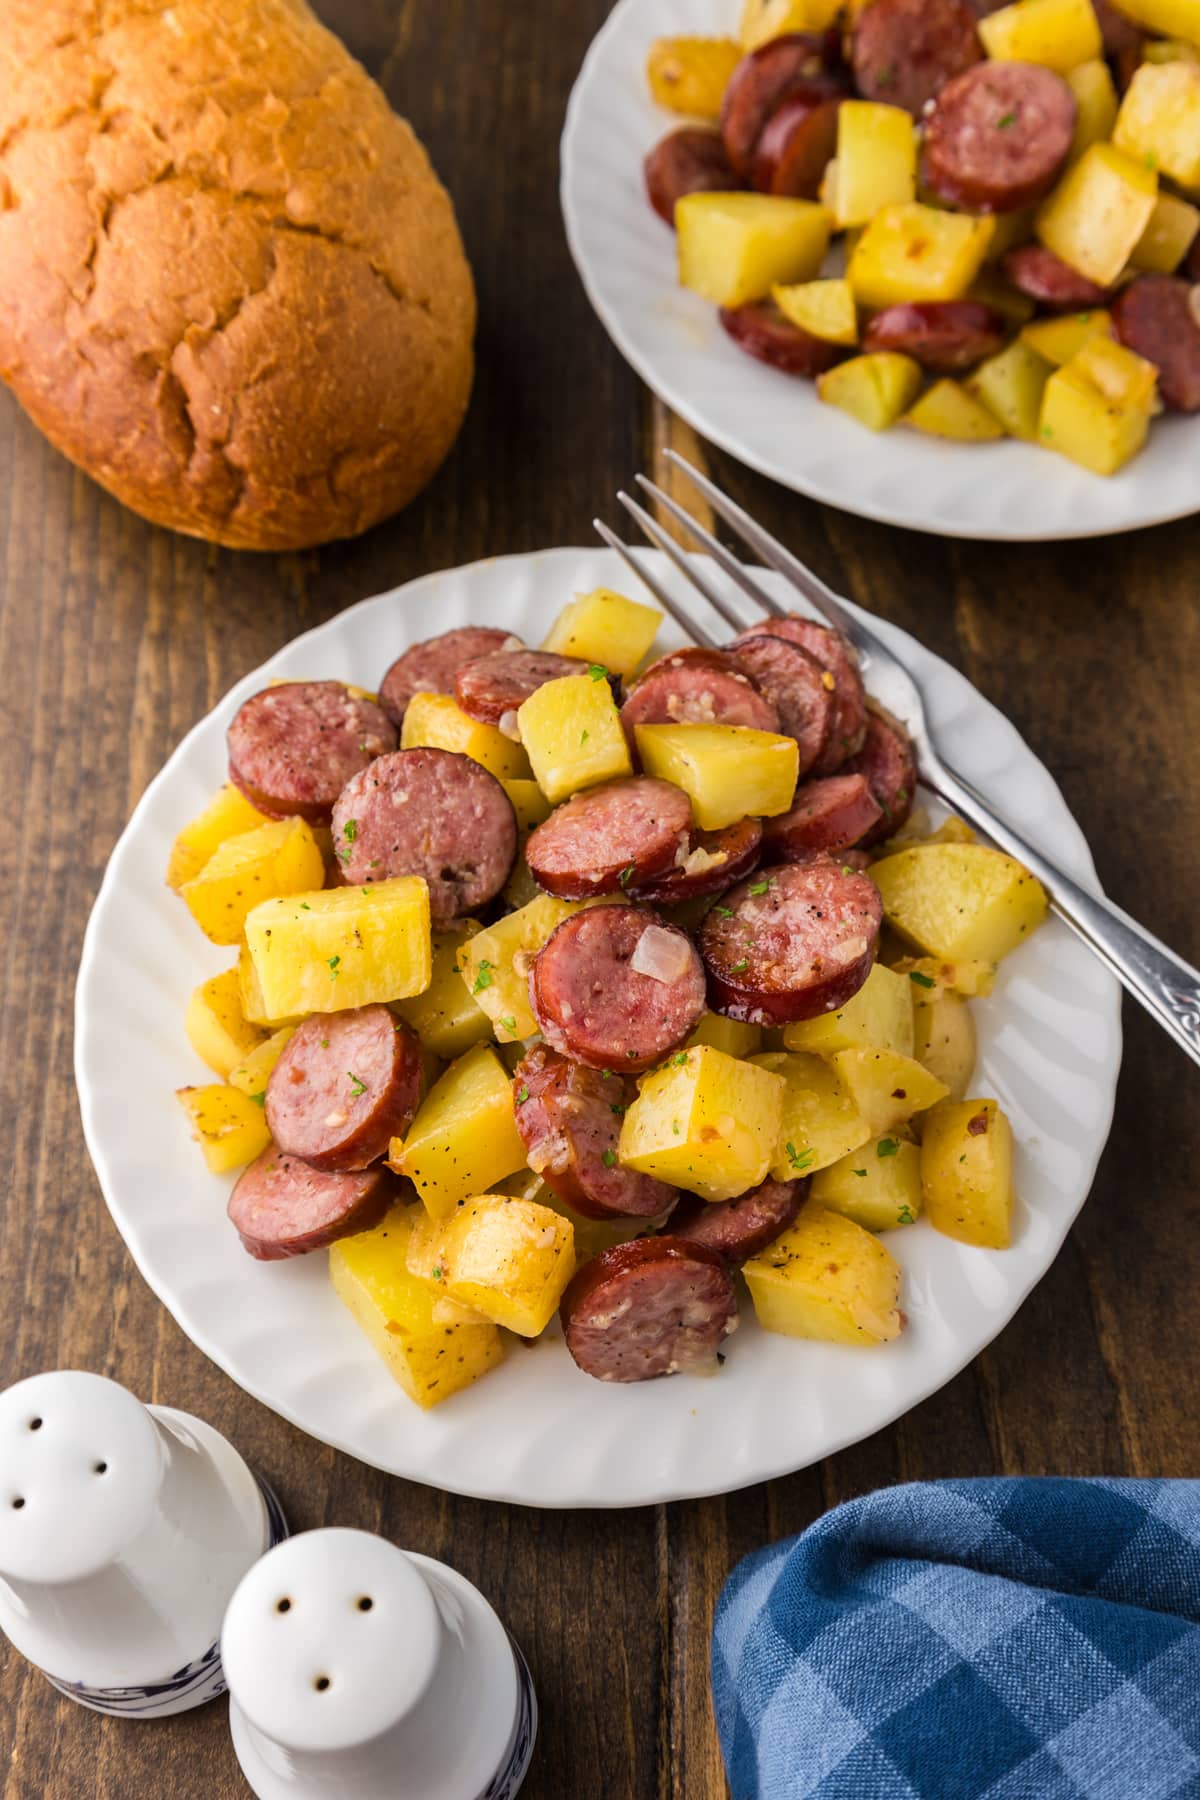 sausage and potatoes on white plate with bread